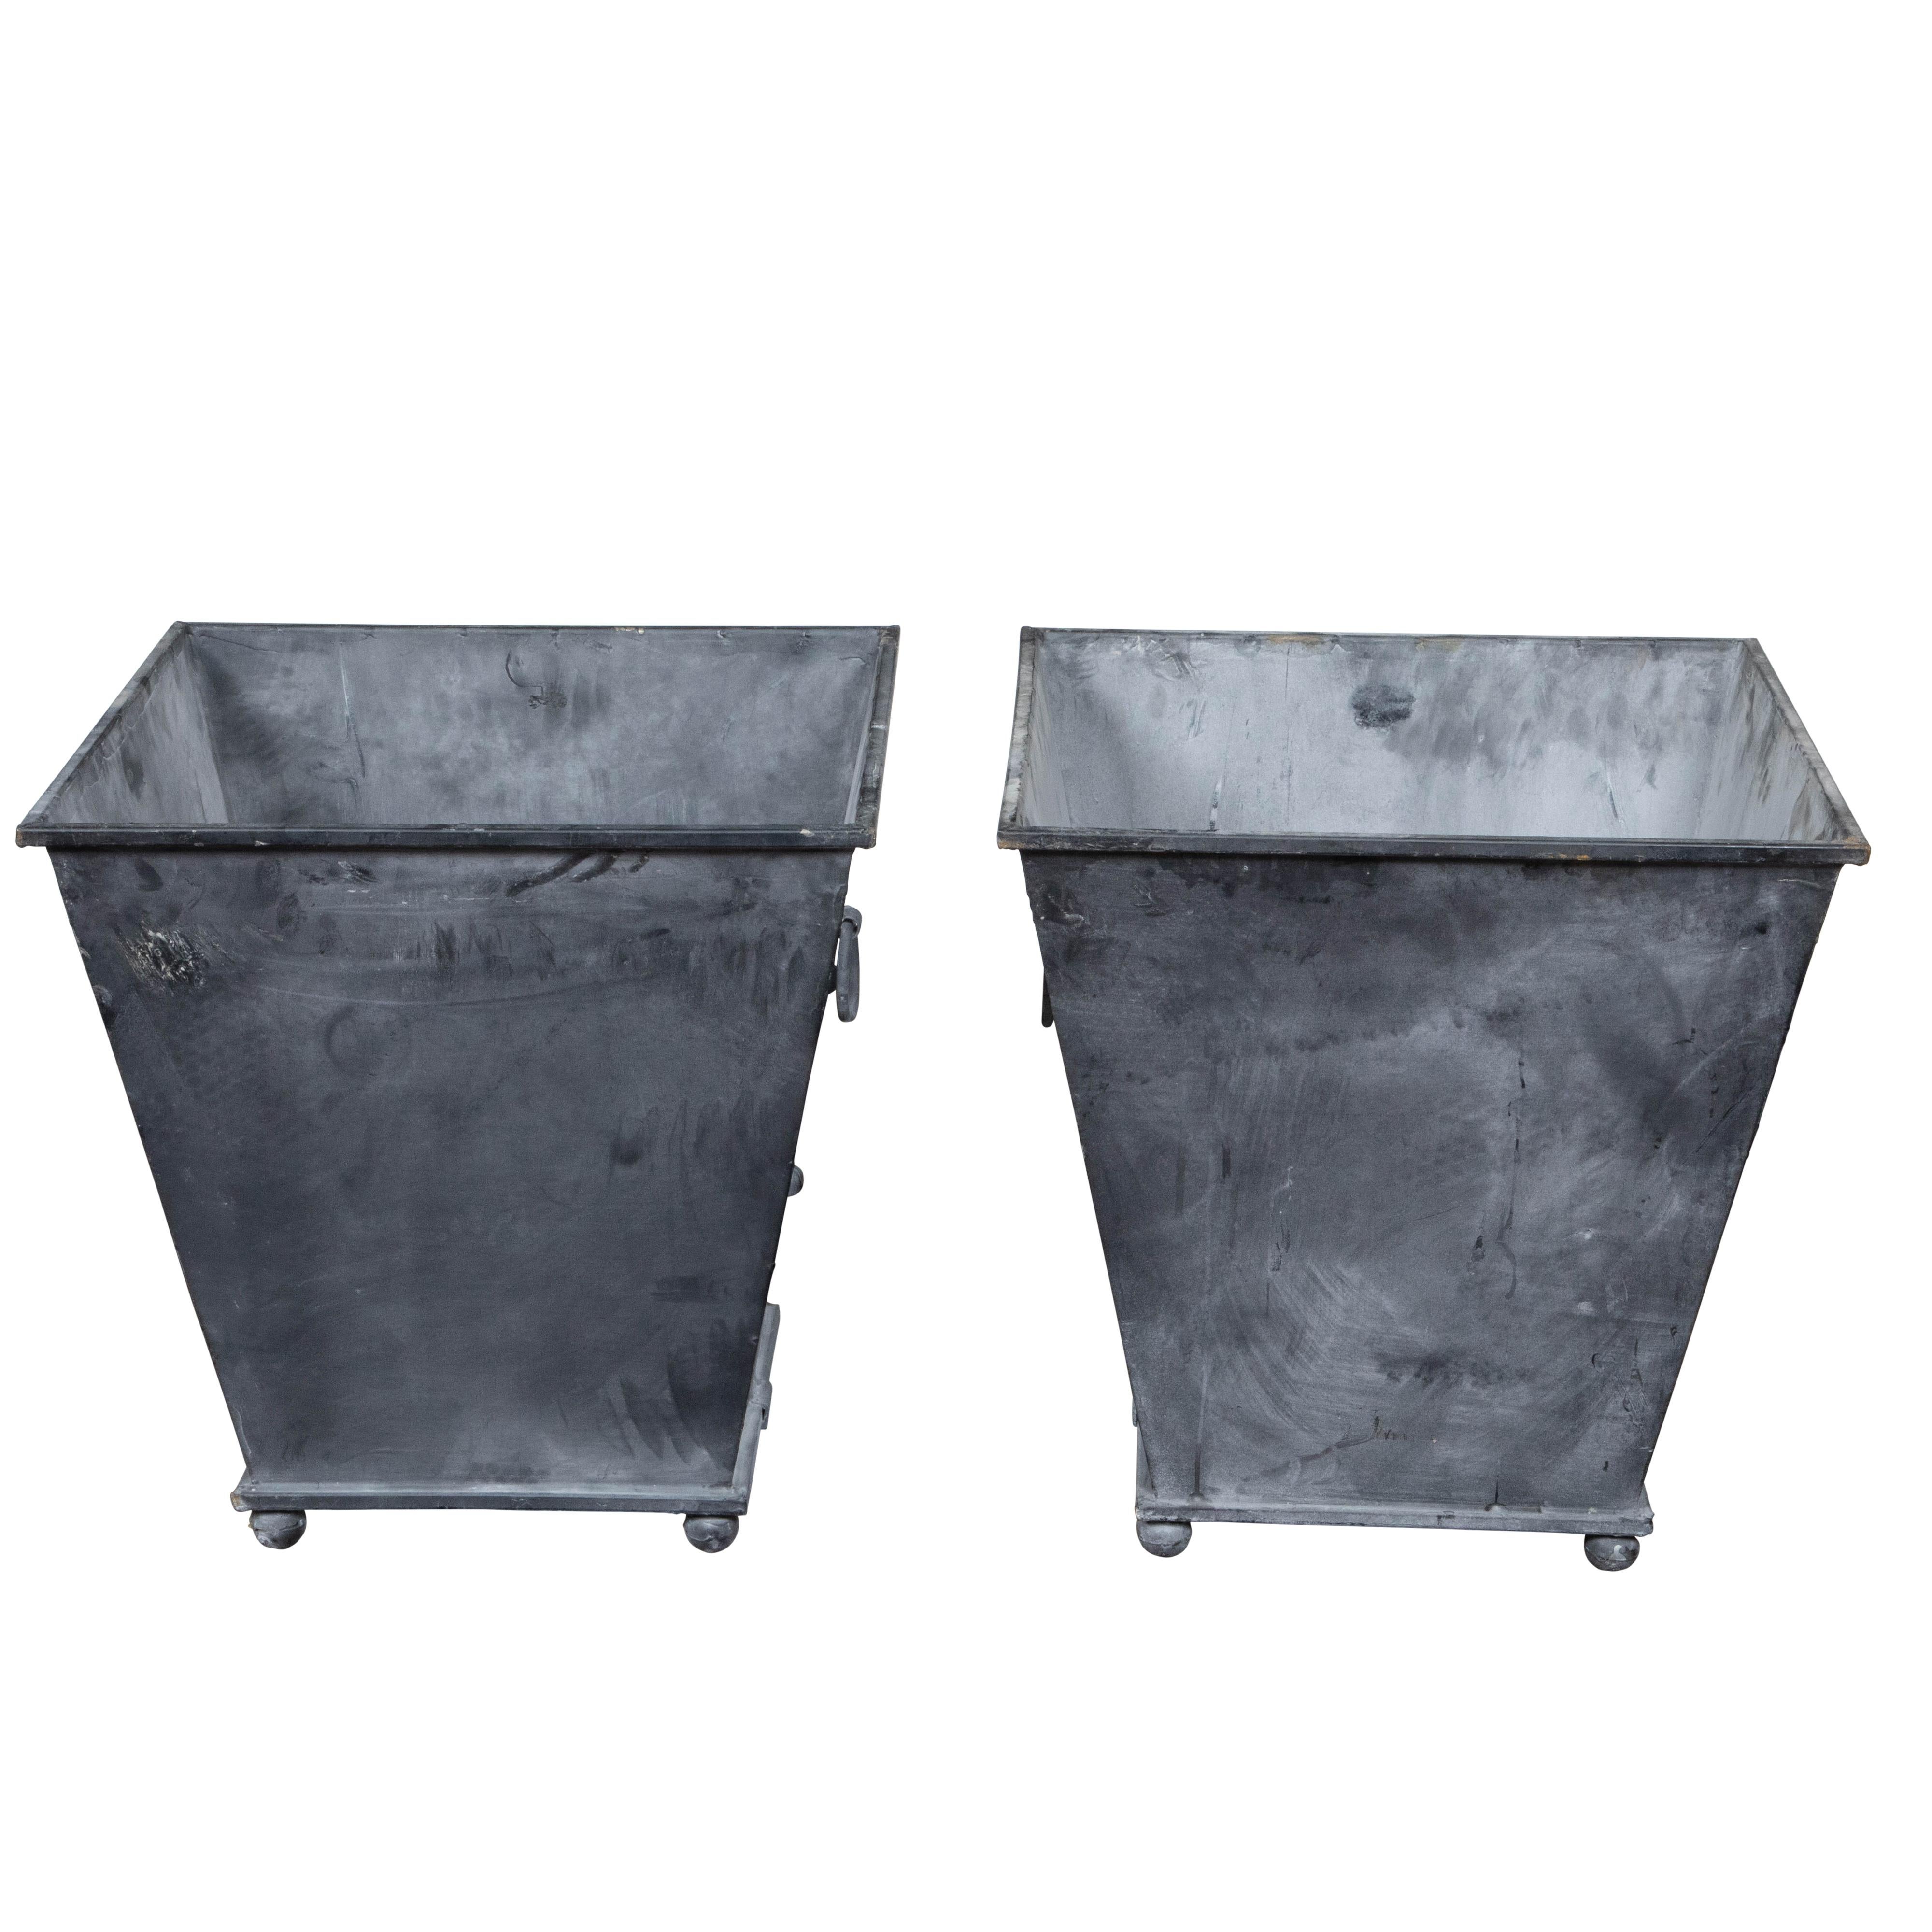 A pair of contemporary American metal cache pot planters from the 21st century with tapered lines, grey patinated color, lateral ring pulls and petite ball feet. Made in the USA during the 21st century, each of this pair of metal planters attracts